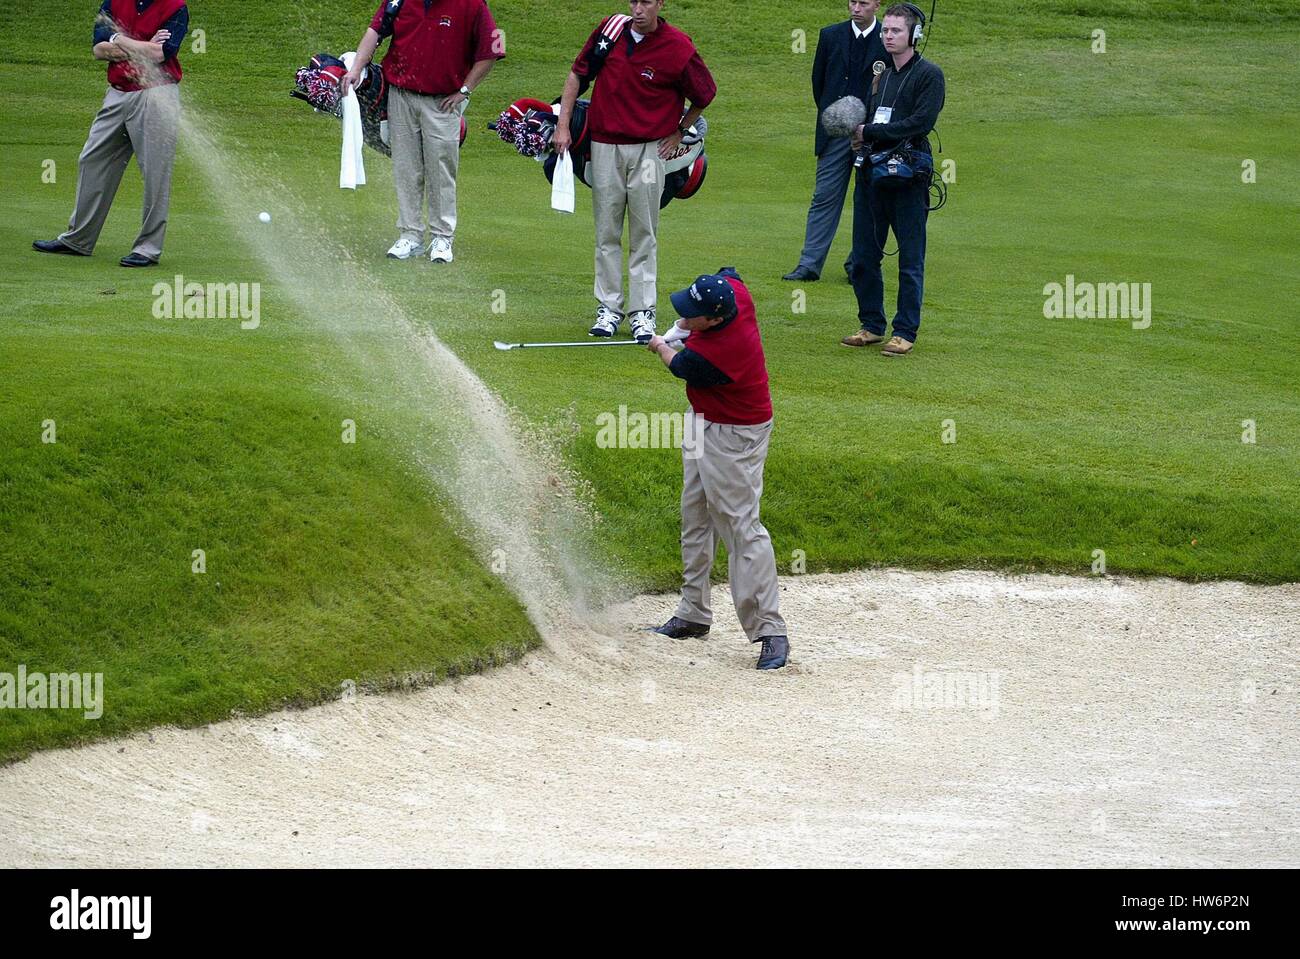 PHIL MICKELSON USA la RYDER CUP 02 28 Settembre 2002 Foto Stock